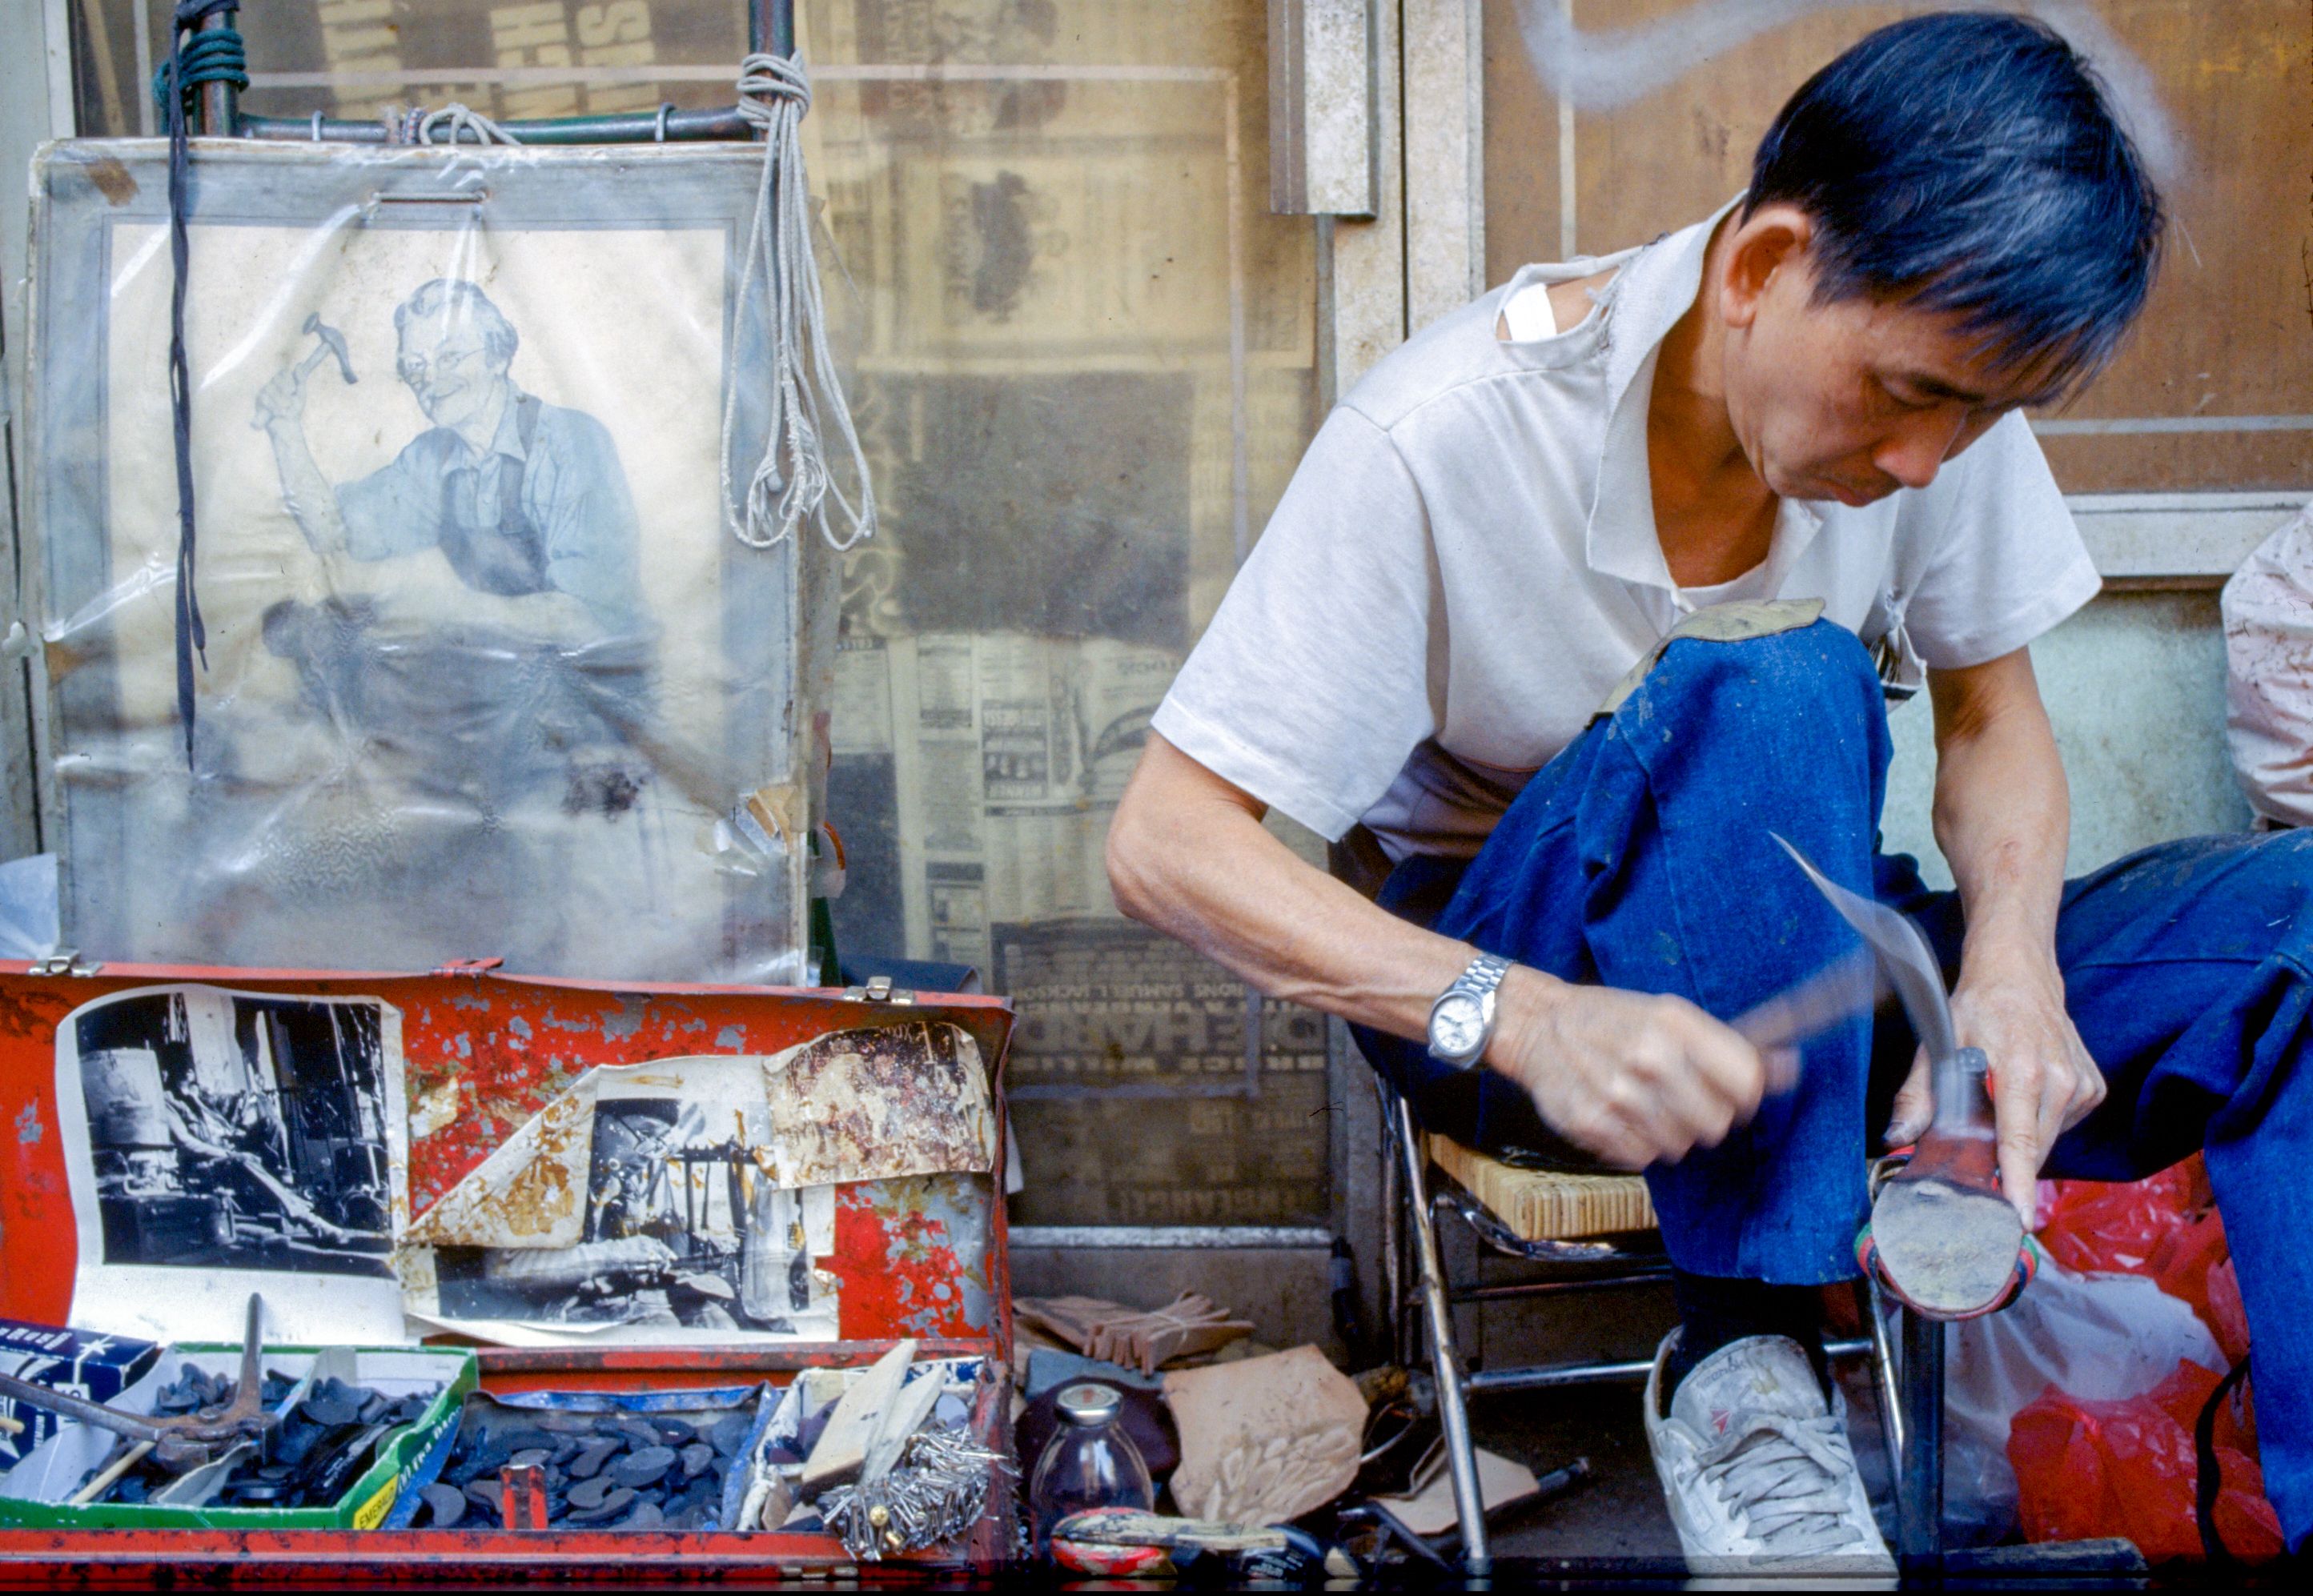 NYC street cobbler works on boot repair with tools and vintage cobbler print